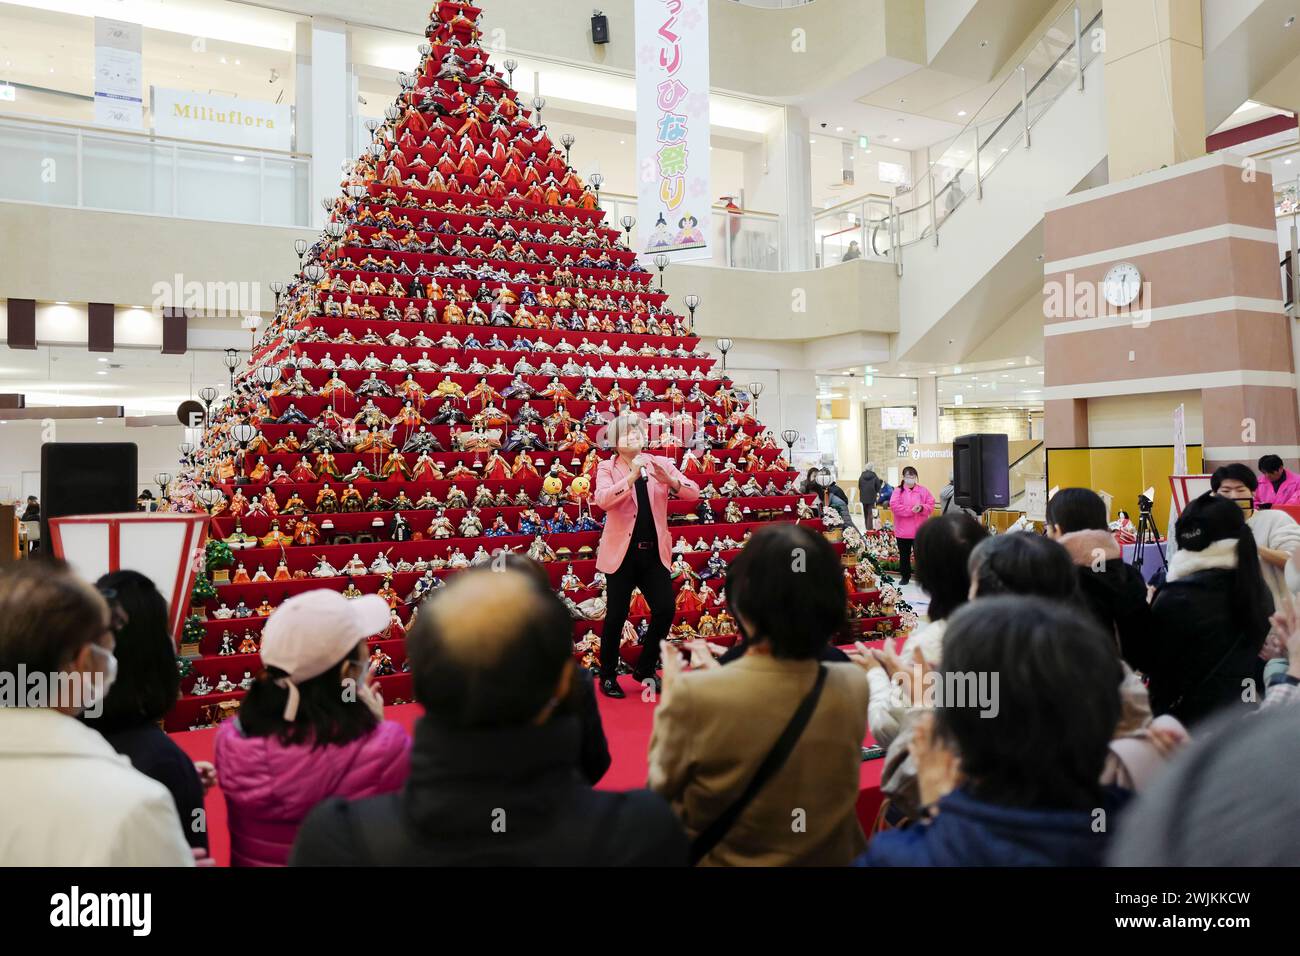 Konosu, Saitama, Japan. 16th Feb, 2024. Japanese singer Hideki Sakuma performs during a special event to celebrate Girls' Day at the Elumi Kounosu Shopping Mall in Konosu city. To commemorate the Hinamatsuri, also known as Doll's Day or Girls' Day, which is celebrated on March 3rd, 1,800 Hina-ningyo (a kind of Japanese doll) are on display on 31 levels of a 7-meter in height doll pyramid in the mall's central area. Every year, families display the dolls in their homes as a wish for the daughters' health and well-being. Konosu city is known as ''Doll Town'' because there are numerous factori Stock Photo